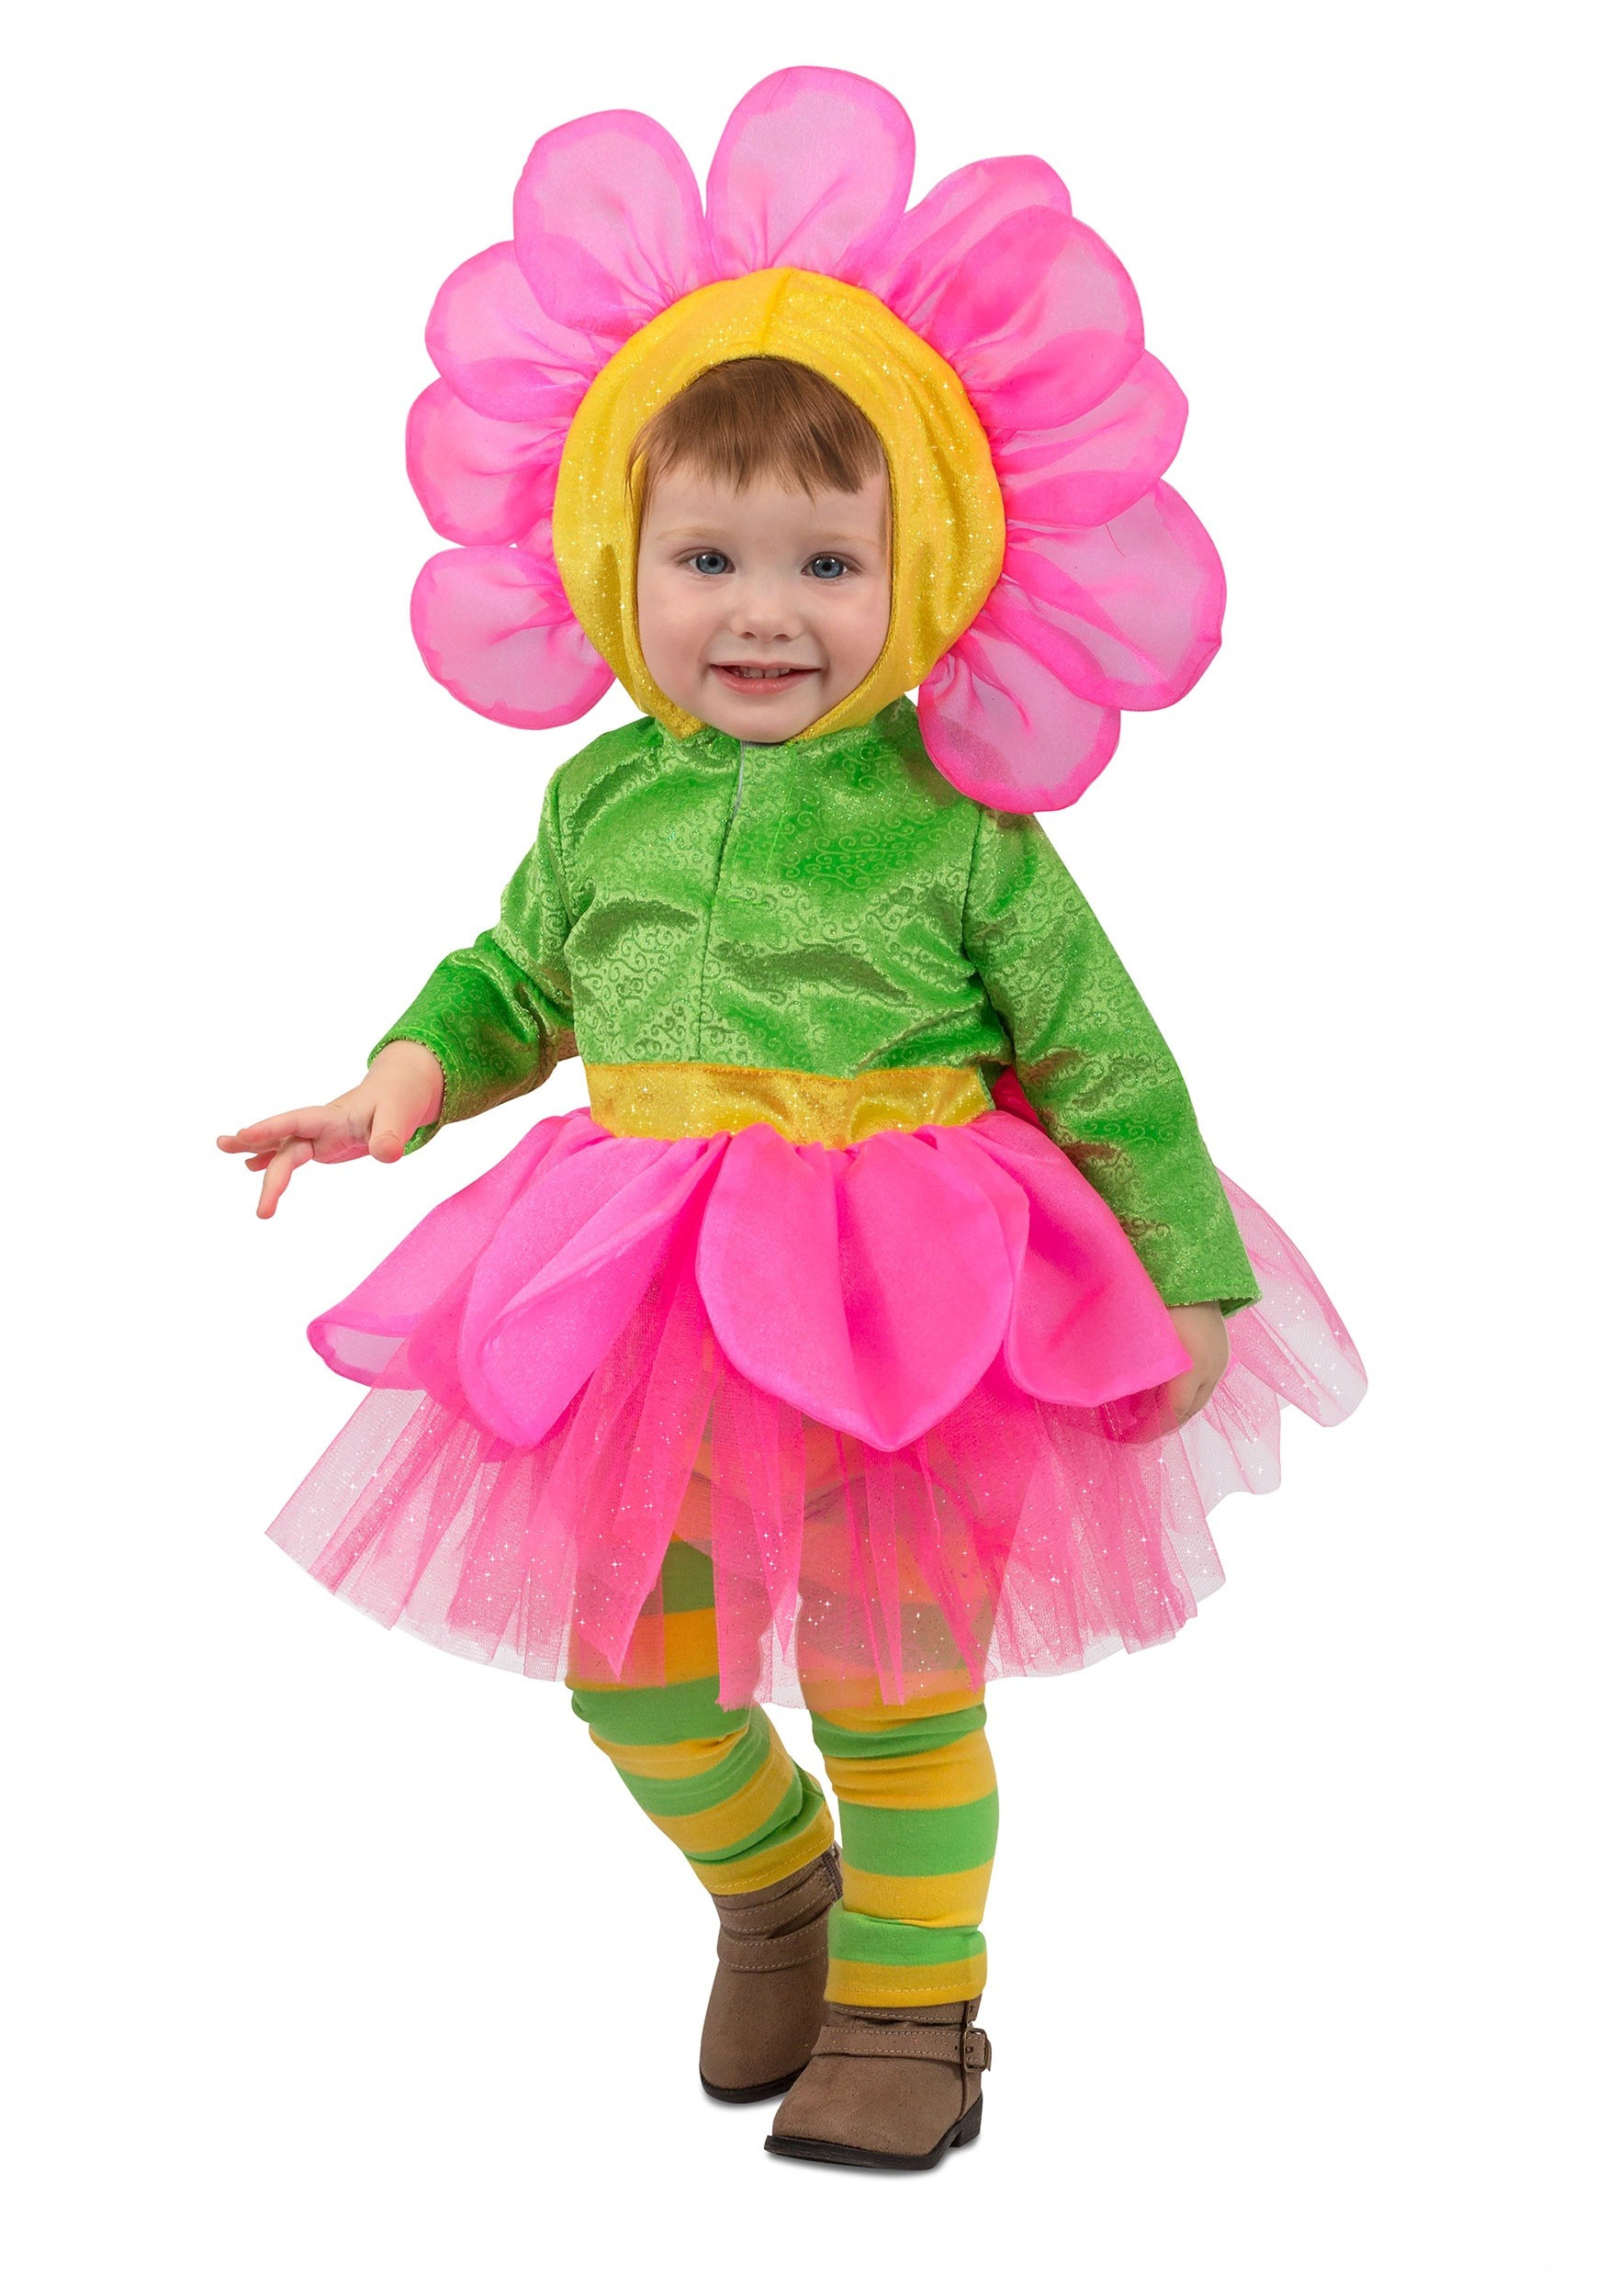 Baby Flower Halloween Costumes
 Girls Flower Costume for a Toddler